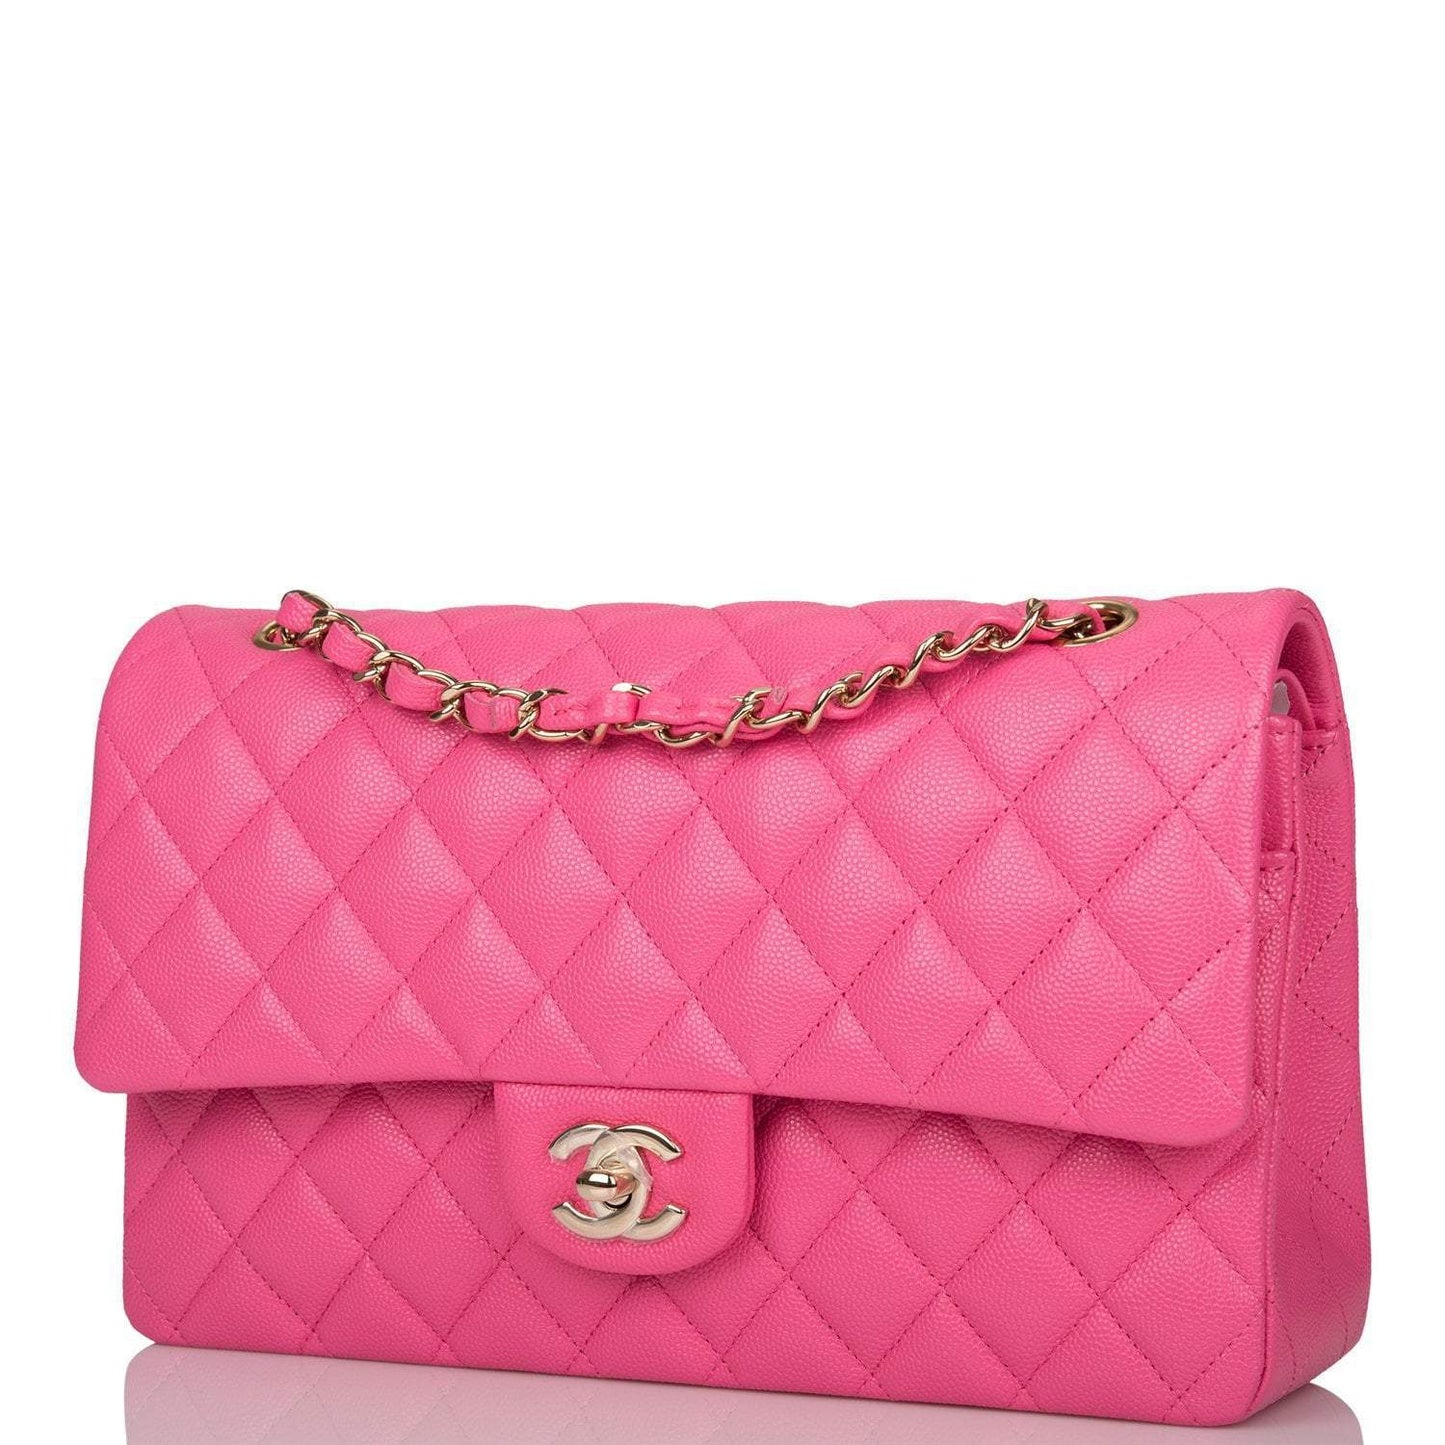 Chanel Pink Quilted Caviar Medium Classic Double Flap Bag Light Gold Hardware